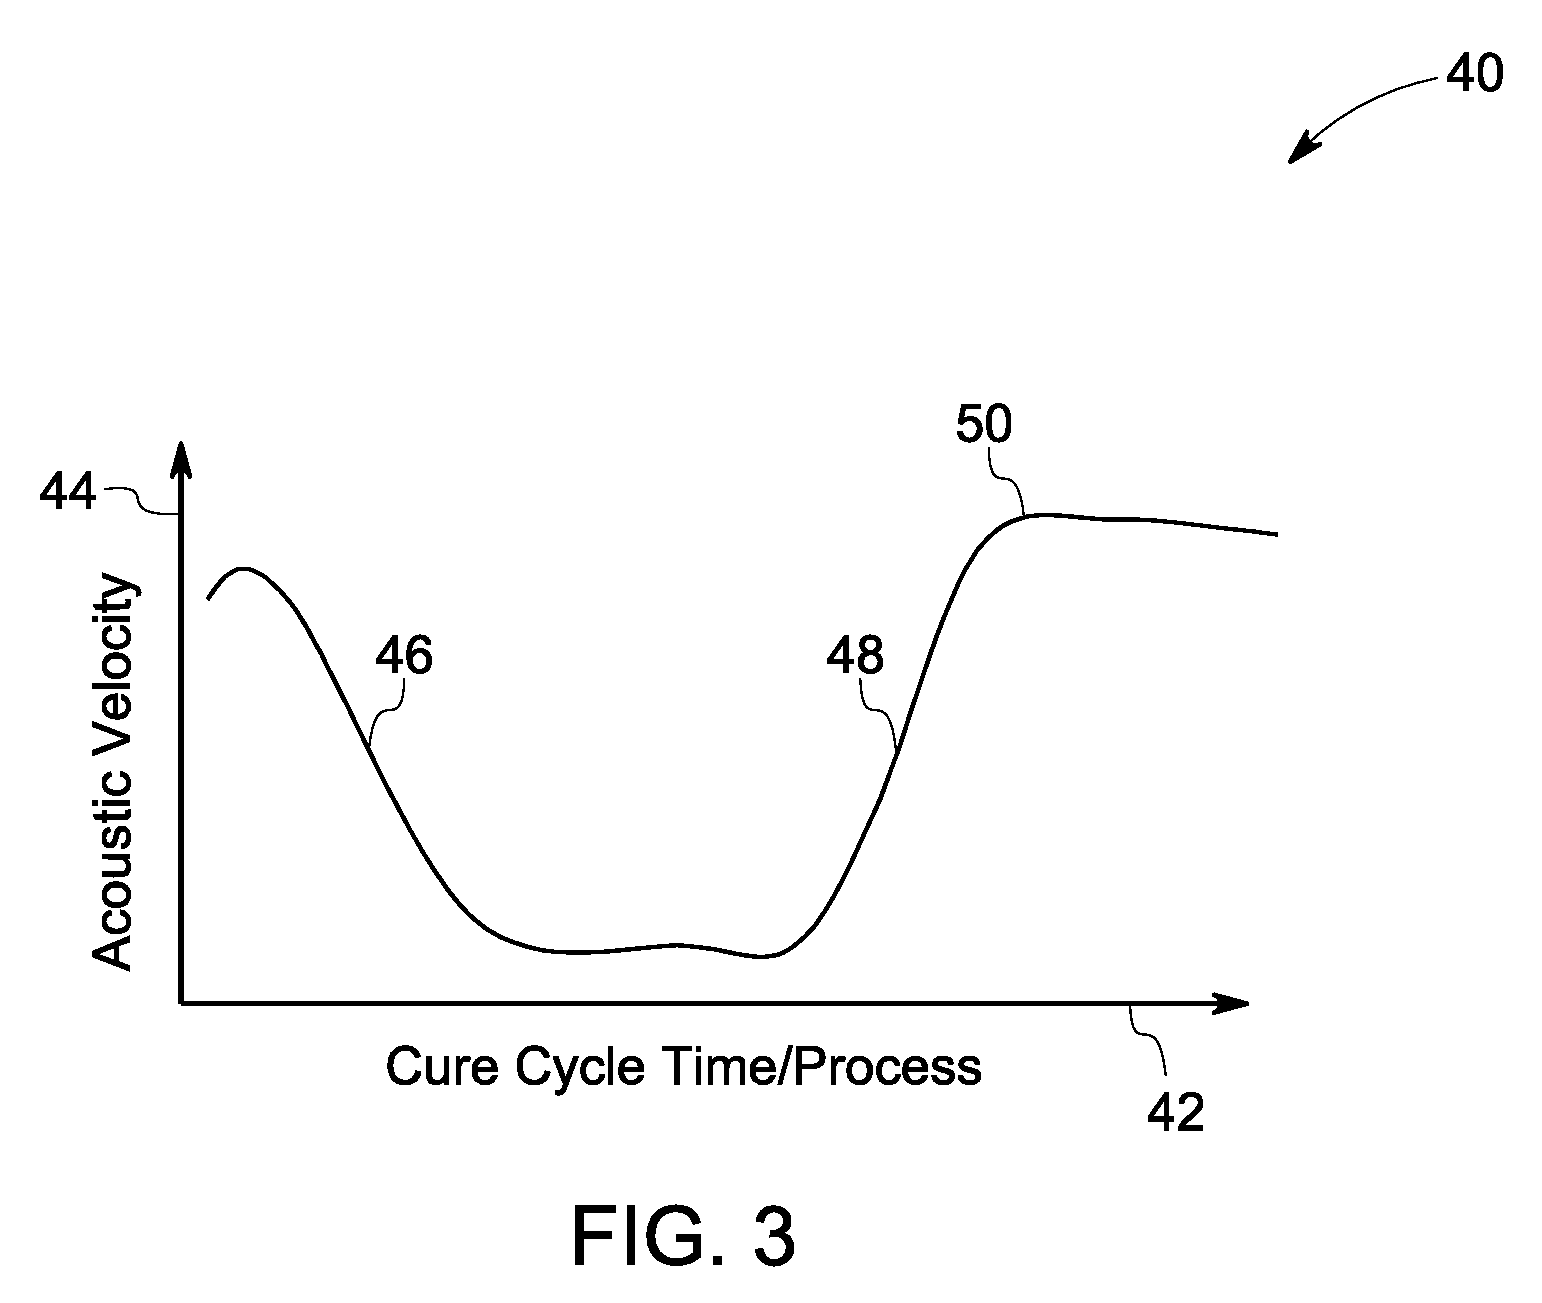 Systems and methods for monitoring a composite cure cycle